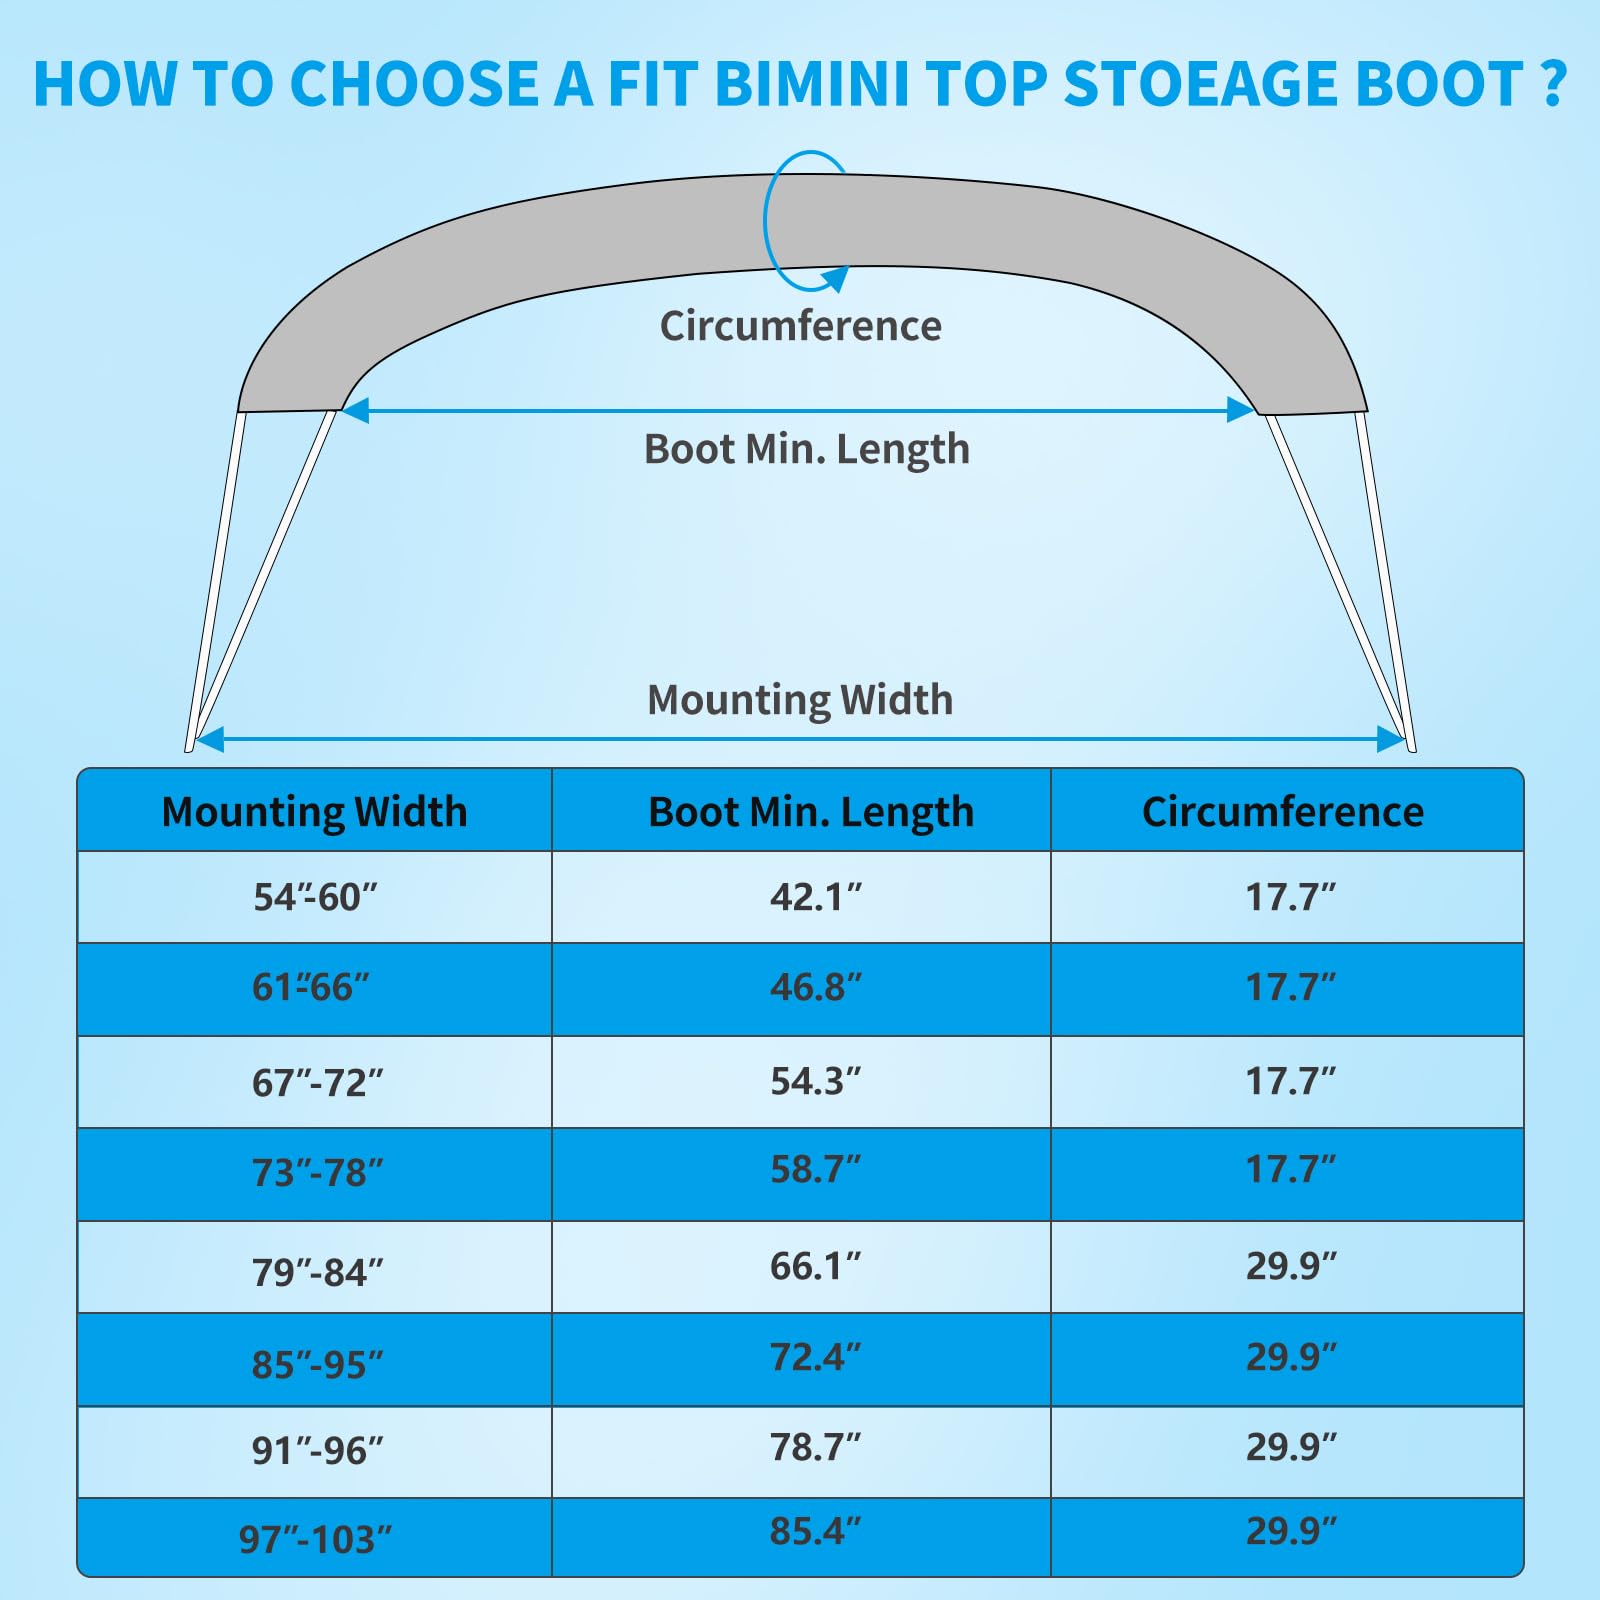 600D Bimini Top Storage Boot with Light Hole